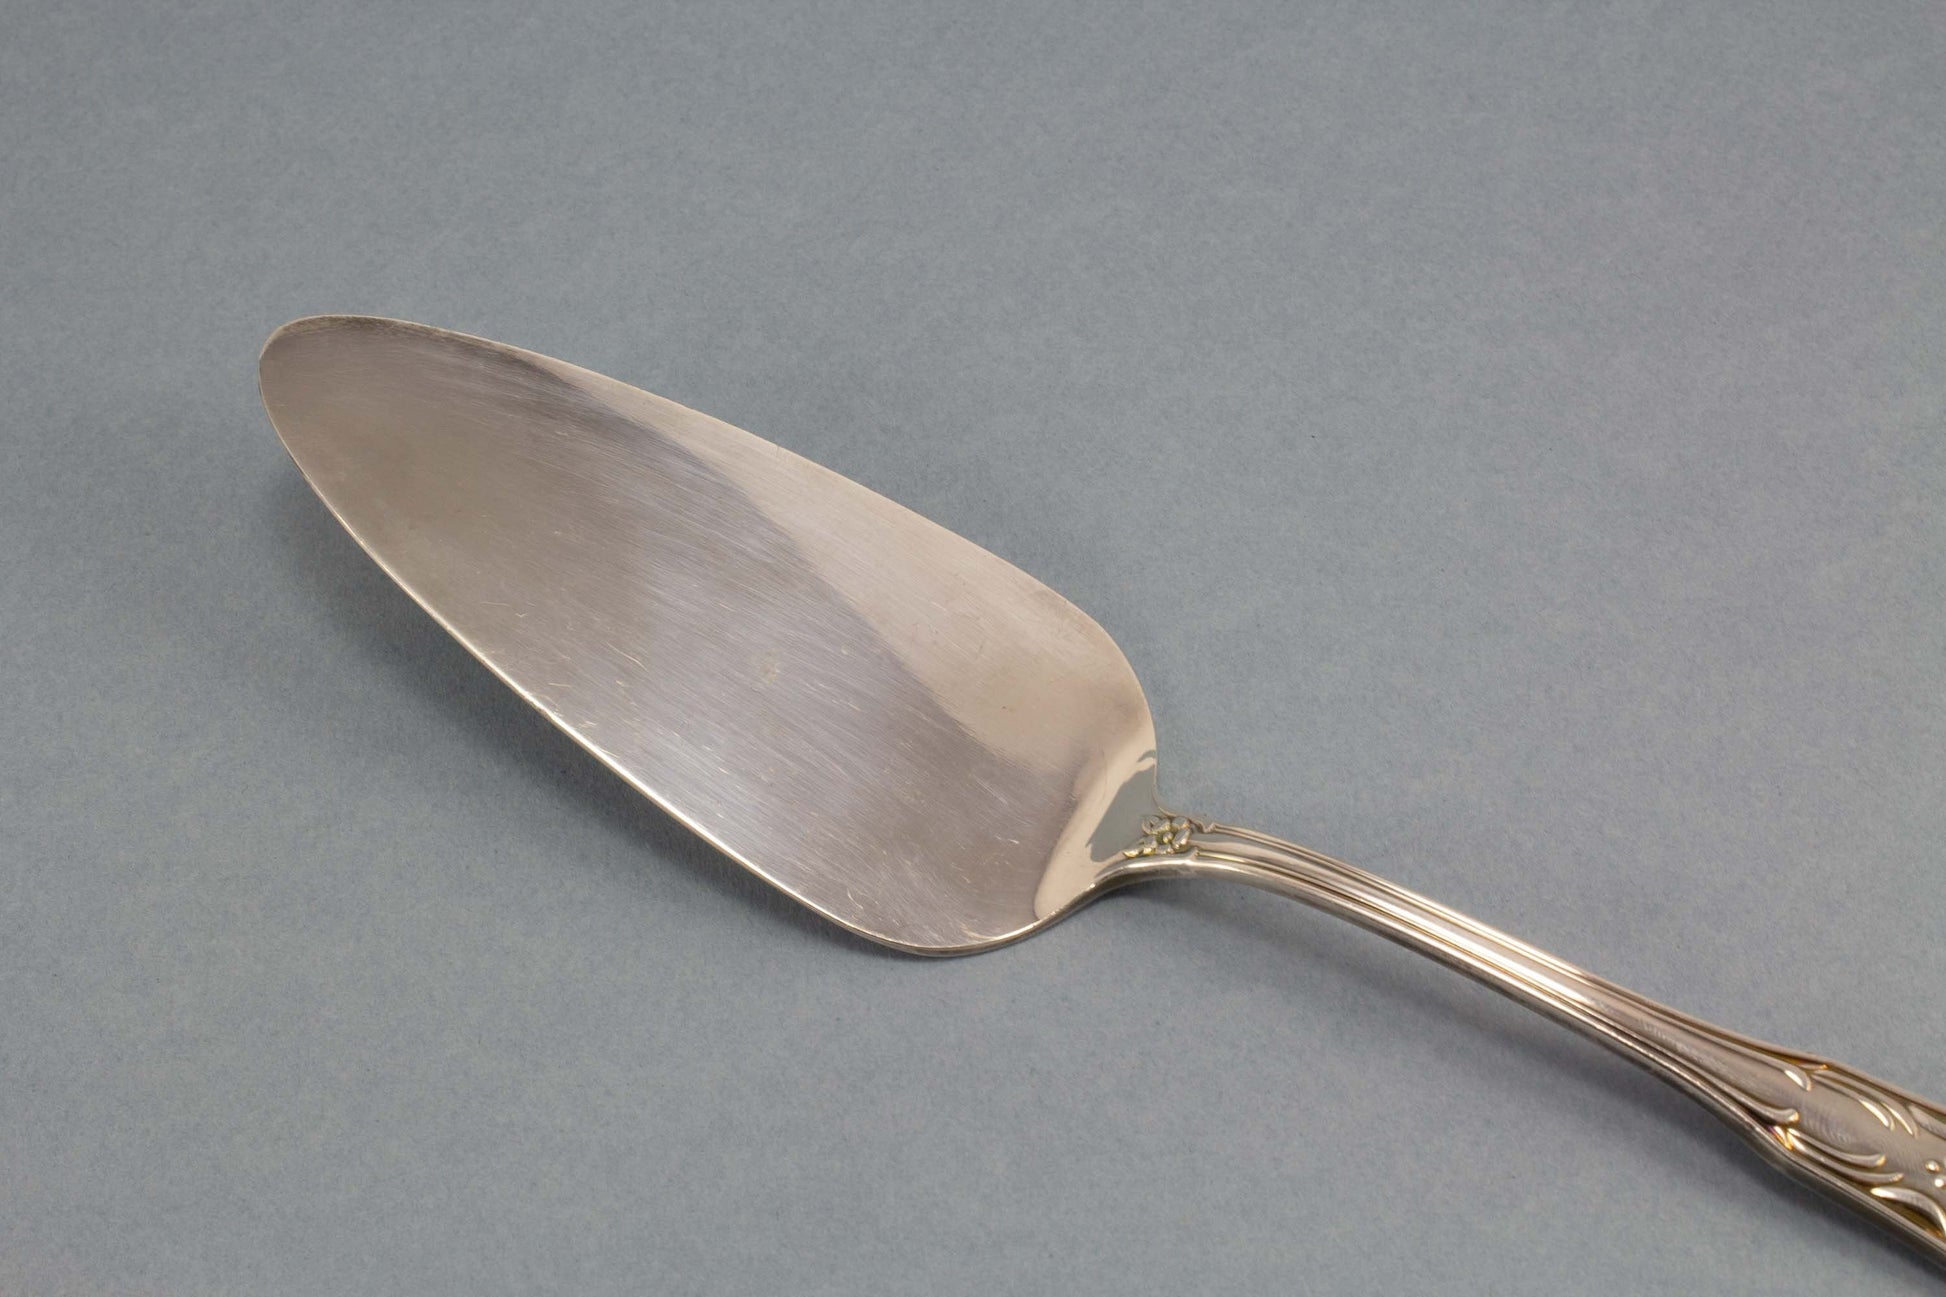 Cake server with rose decoration, silver-plated pastry server 